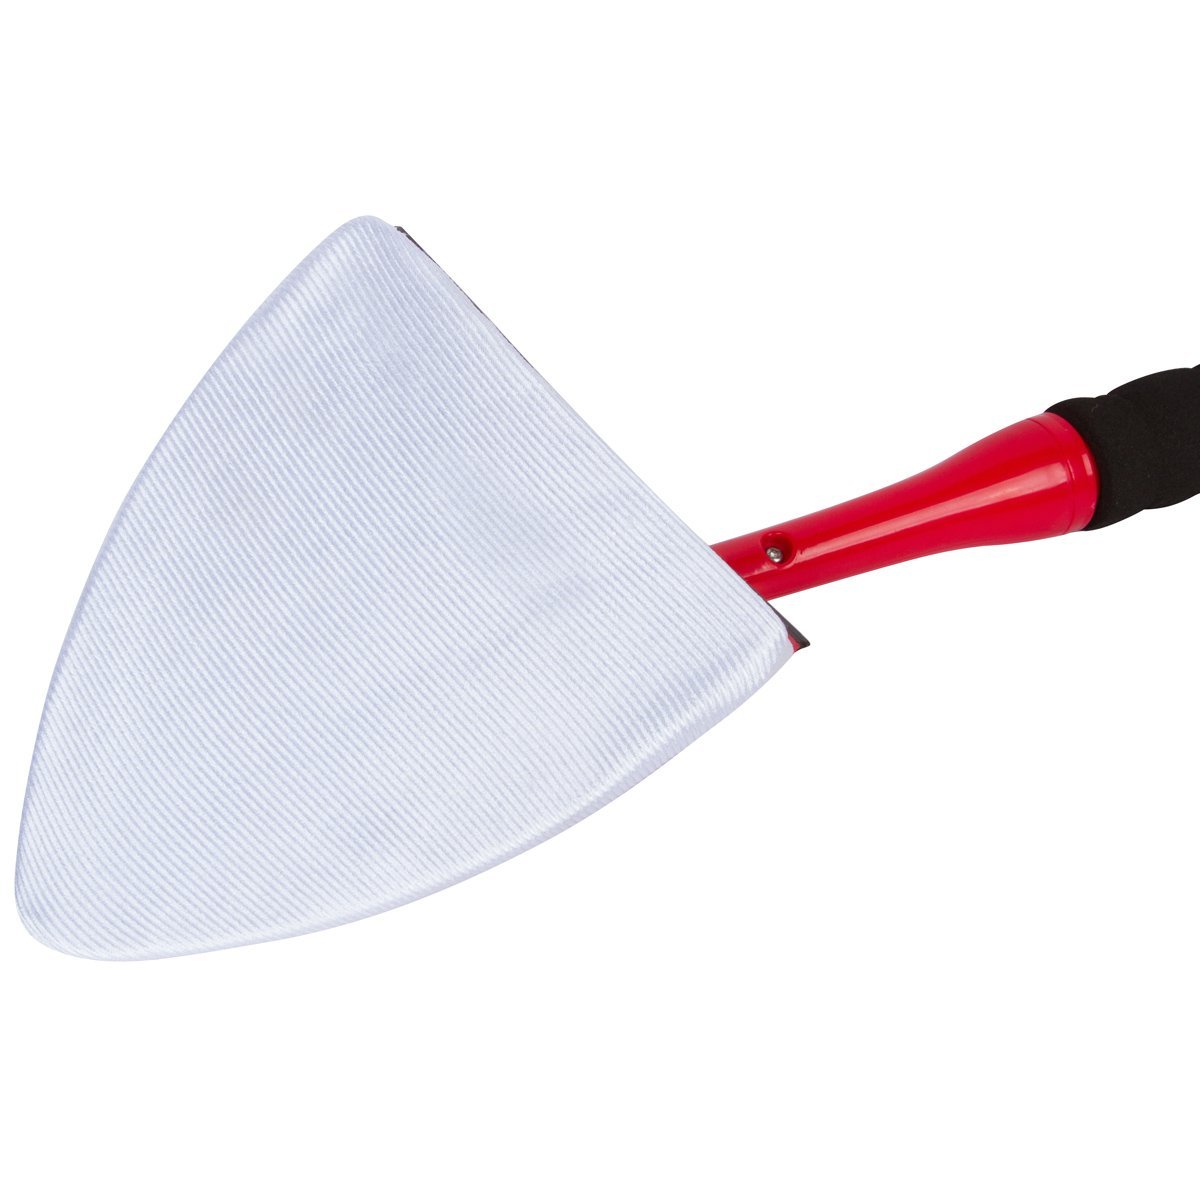 360-degree-Rotary-Cleaning-Brush-Multi-function-Triangular-Glass-Cleaning-Blade-Cleaning-Wipe-1289040